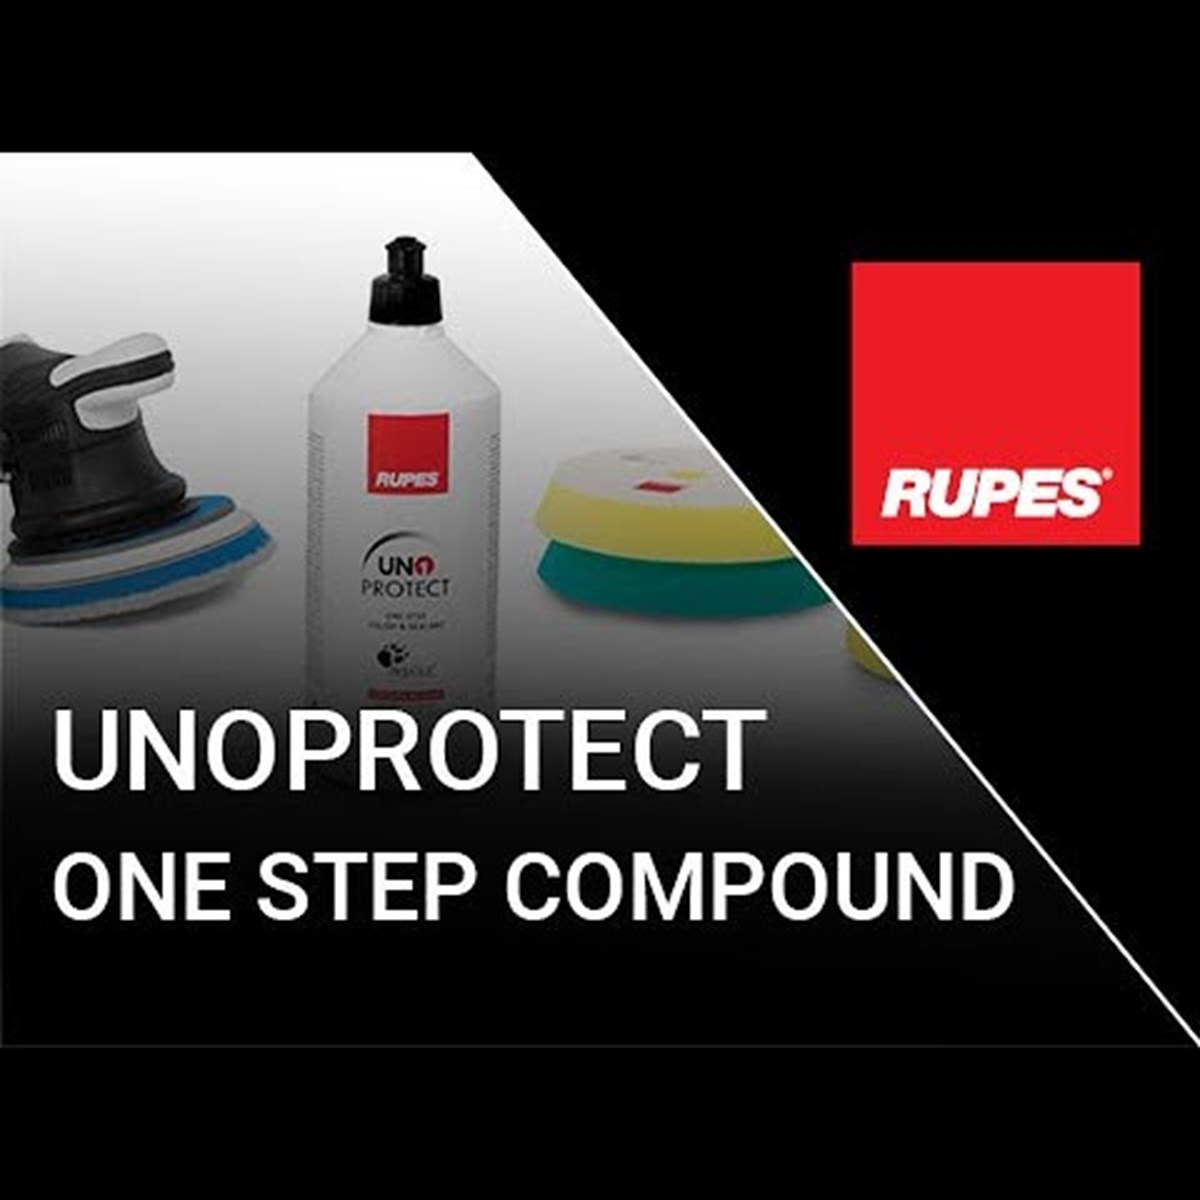 https://lakgruppen.com/media/17032/unoprotect-one-step-compound.jpg?mode=pad&width=1200&height=1200&rnd=132230499960000000